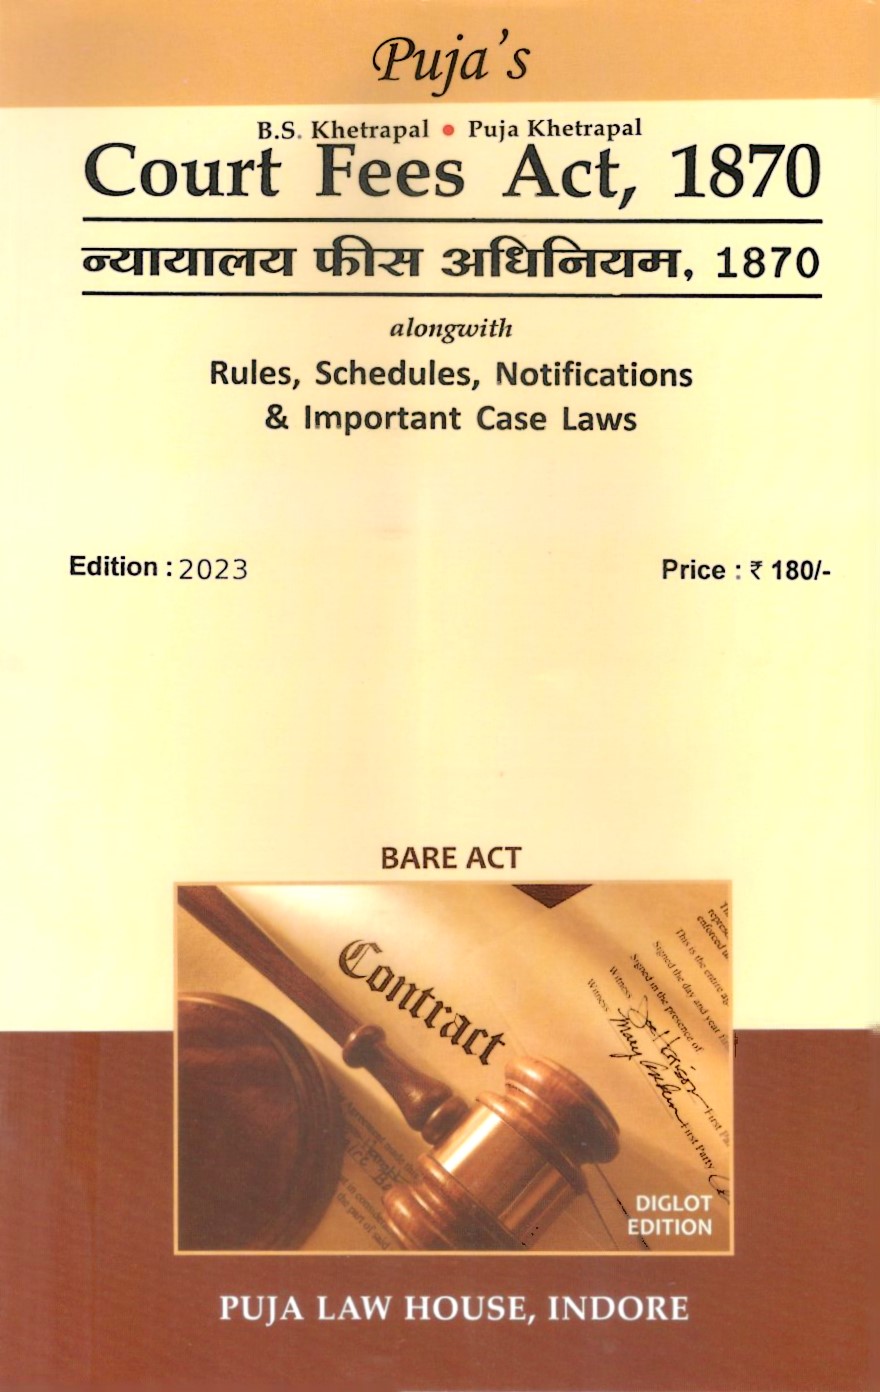 Court fees Act, 1870 (As applicable in the State of Chhattisgarh) / न्यायालय फीस अधिनियम, 1870 